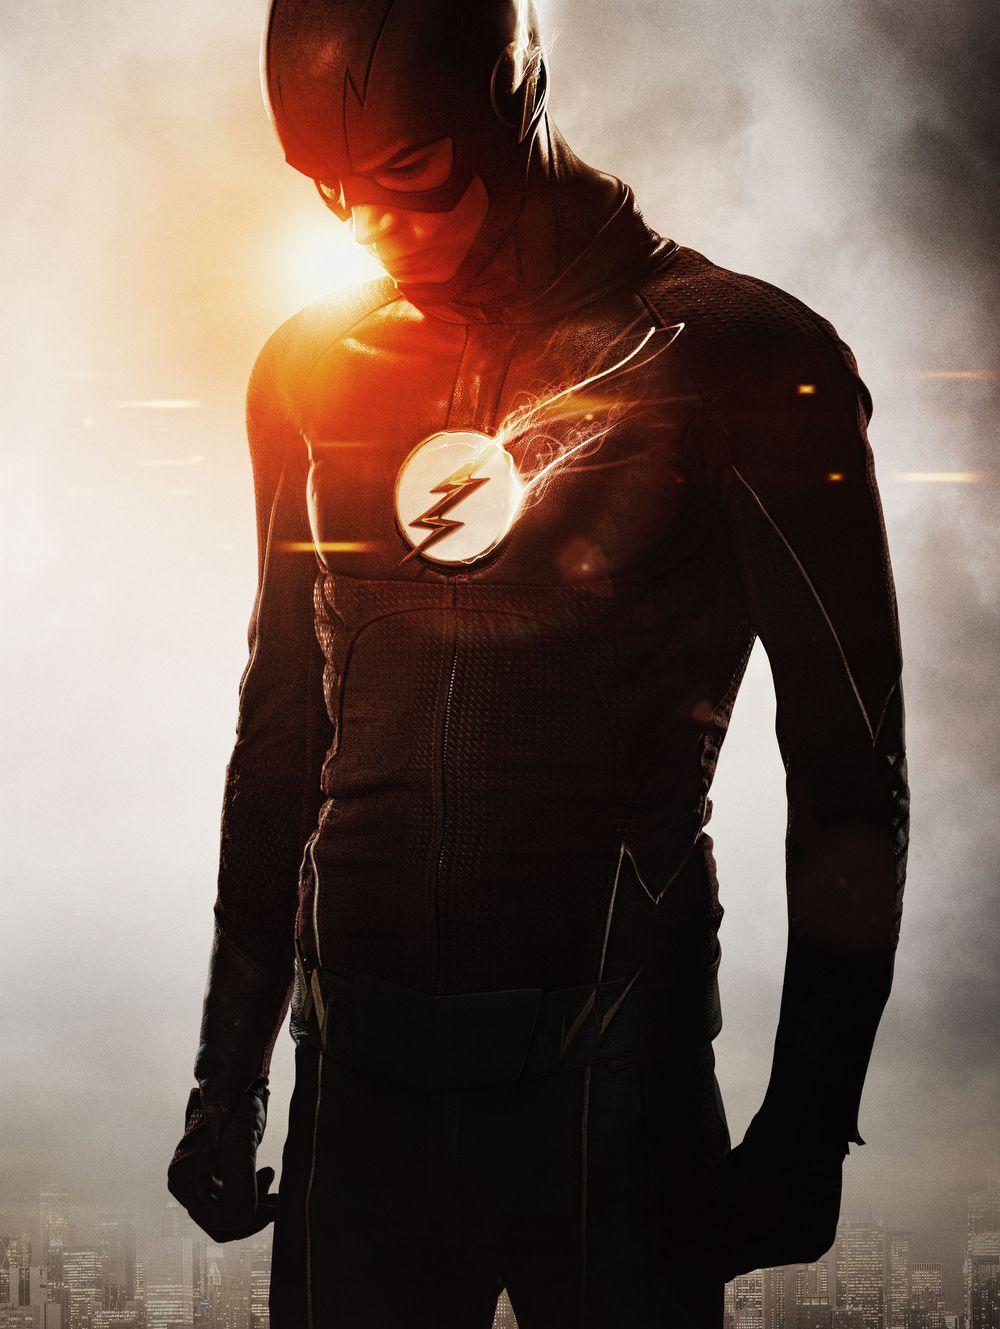 The Flash&; Goes White in Upgraded Season 2 Costume Photo